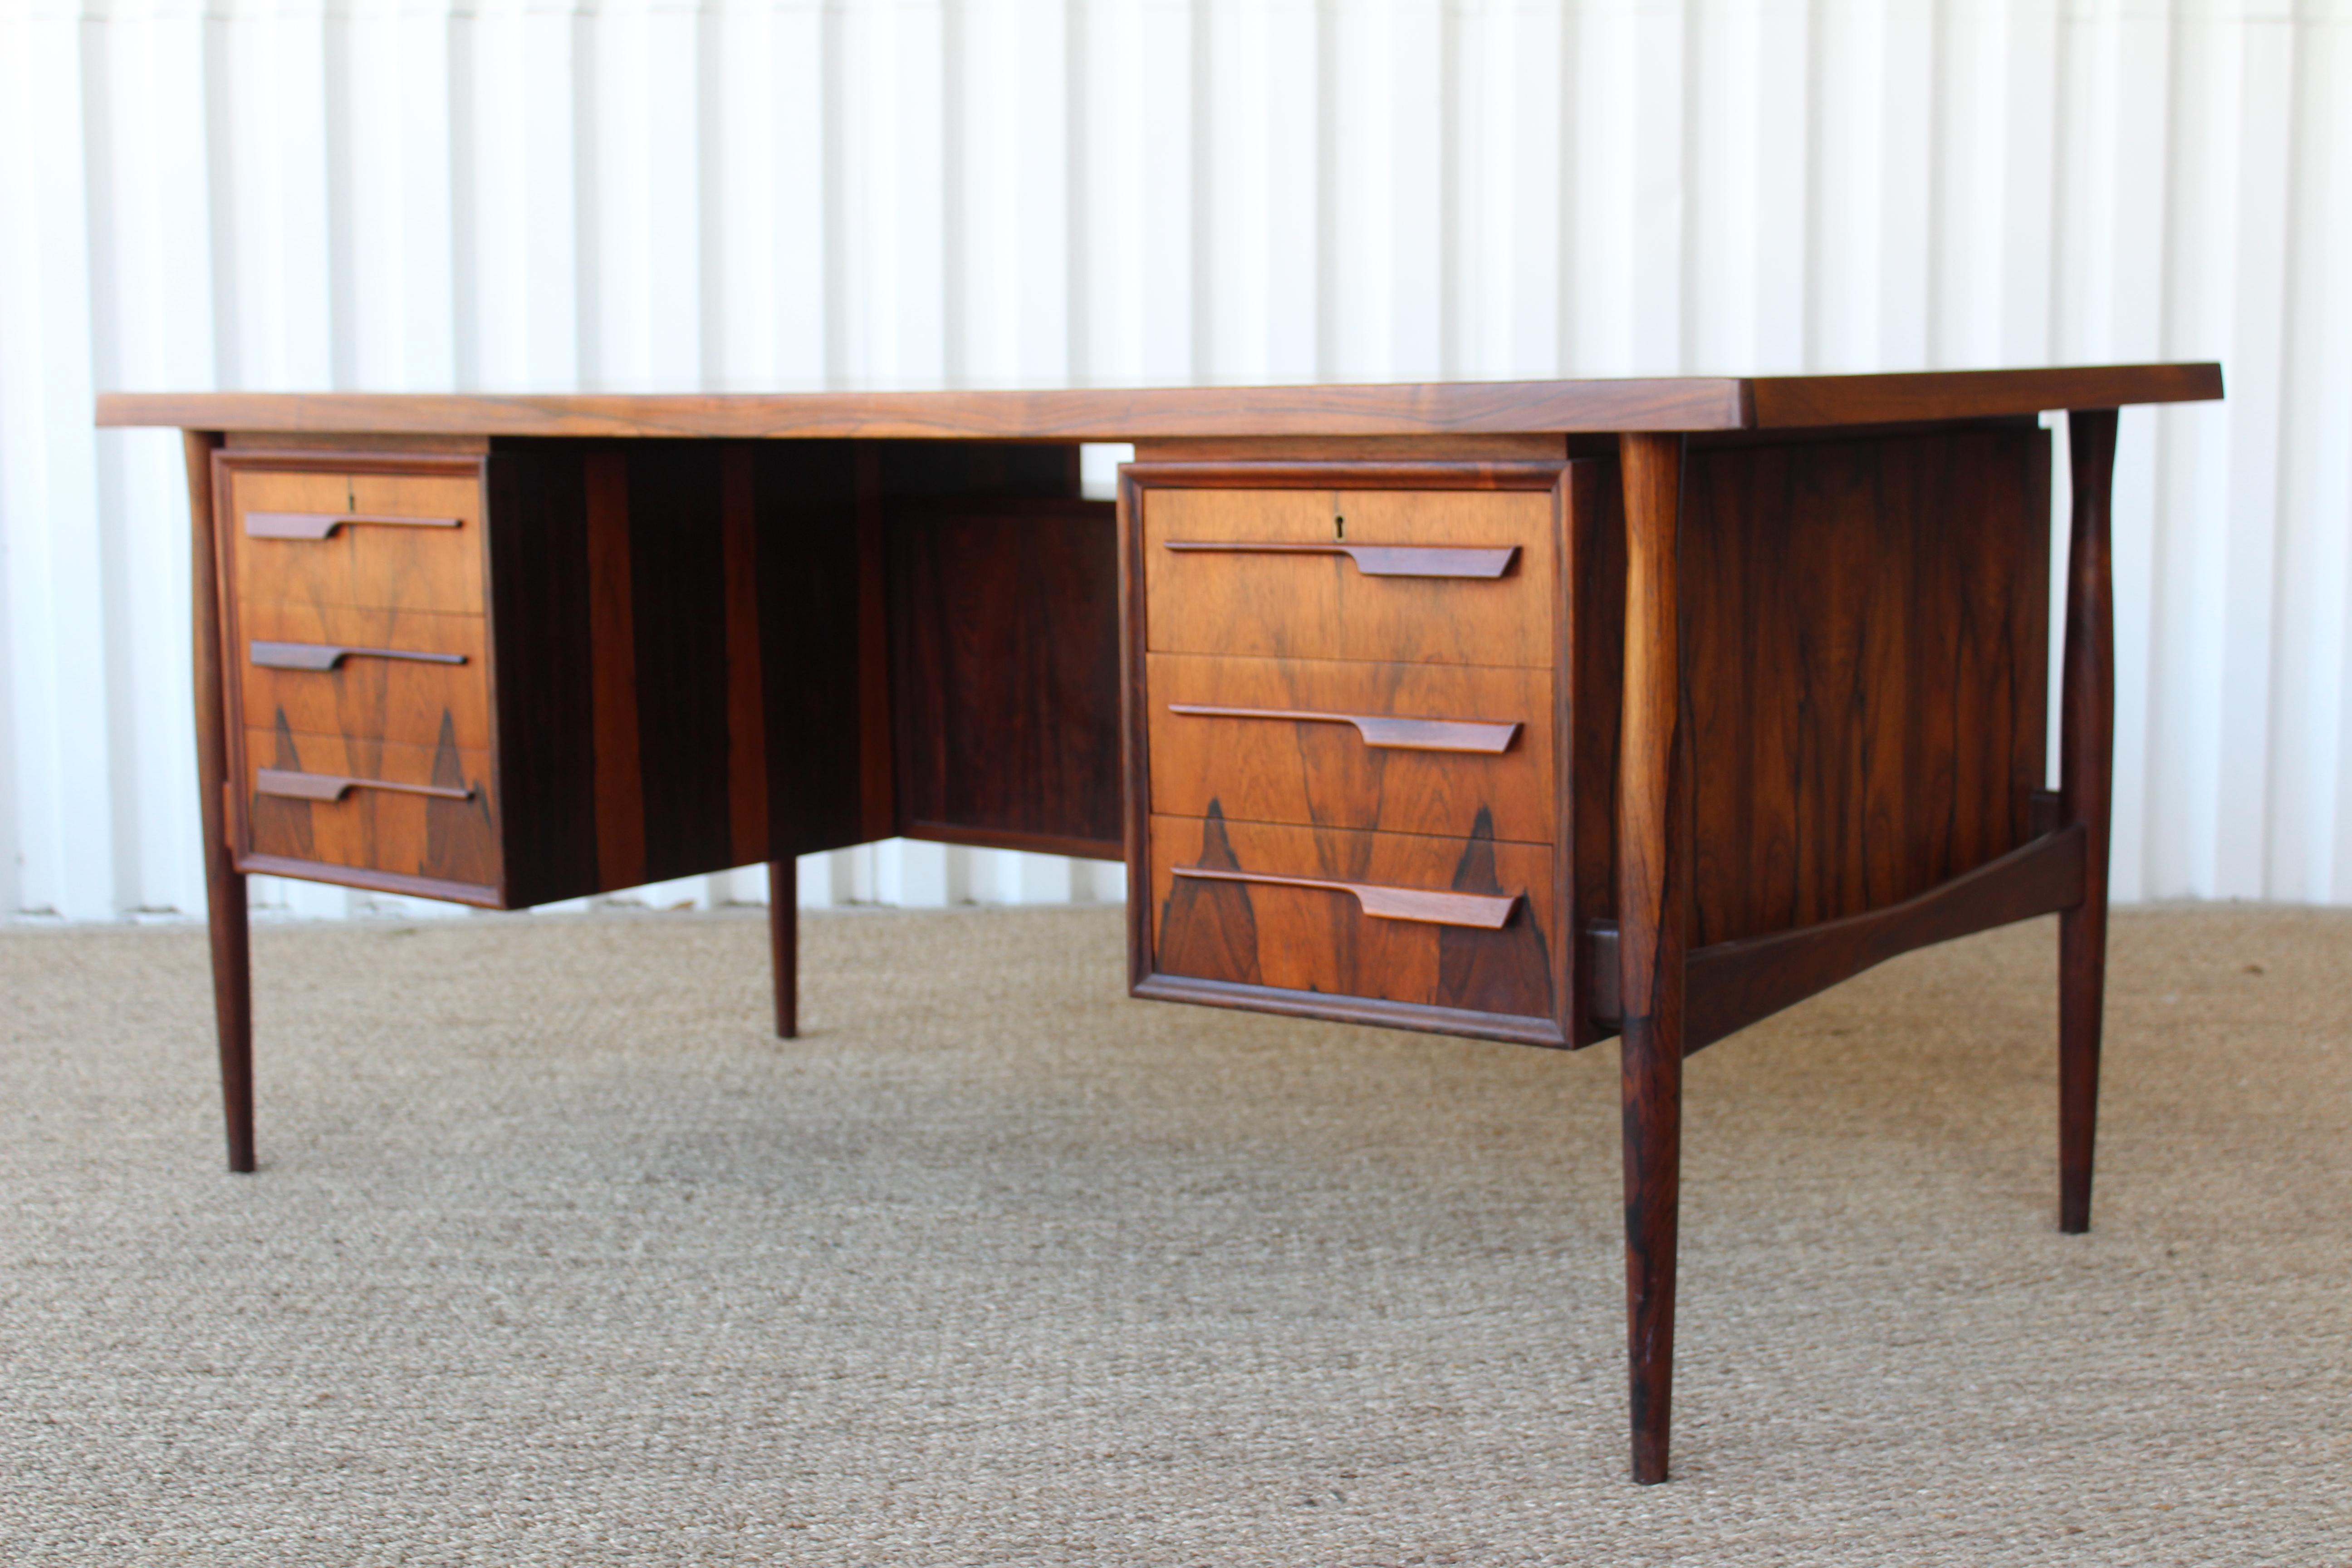 Danish modern desk in Brazilian rosewood. Five front drawers, two back compartments for storage and shelf for books in the back. Sculpted rosewood pulls. Recently refinished with some minor fading and surface wear on the top surface. Comes with a